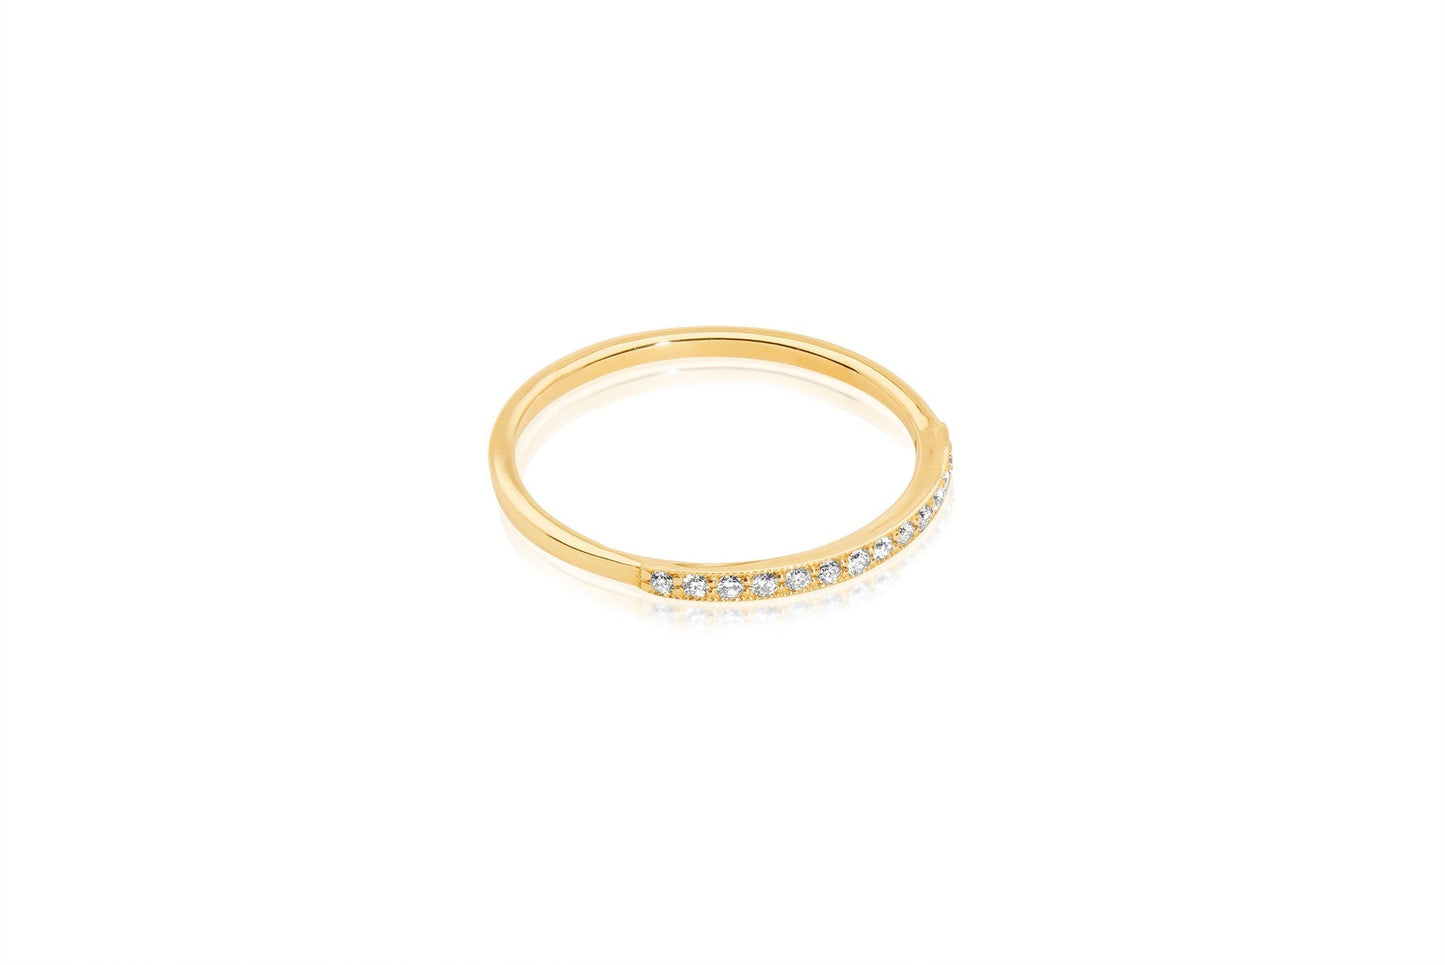 French Pave Wedding Band